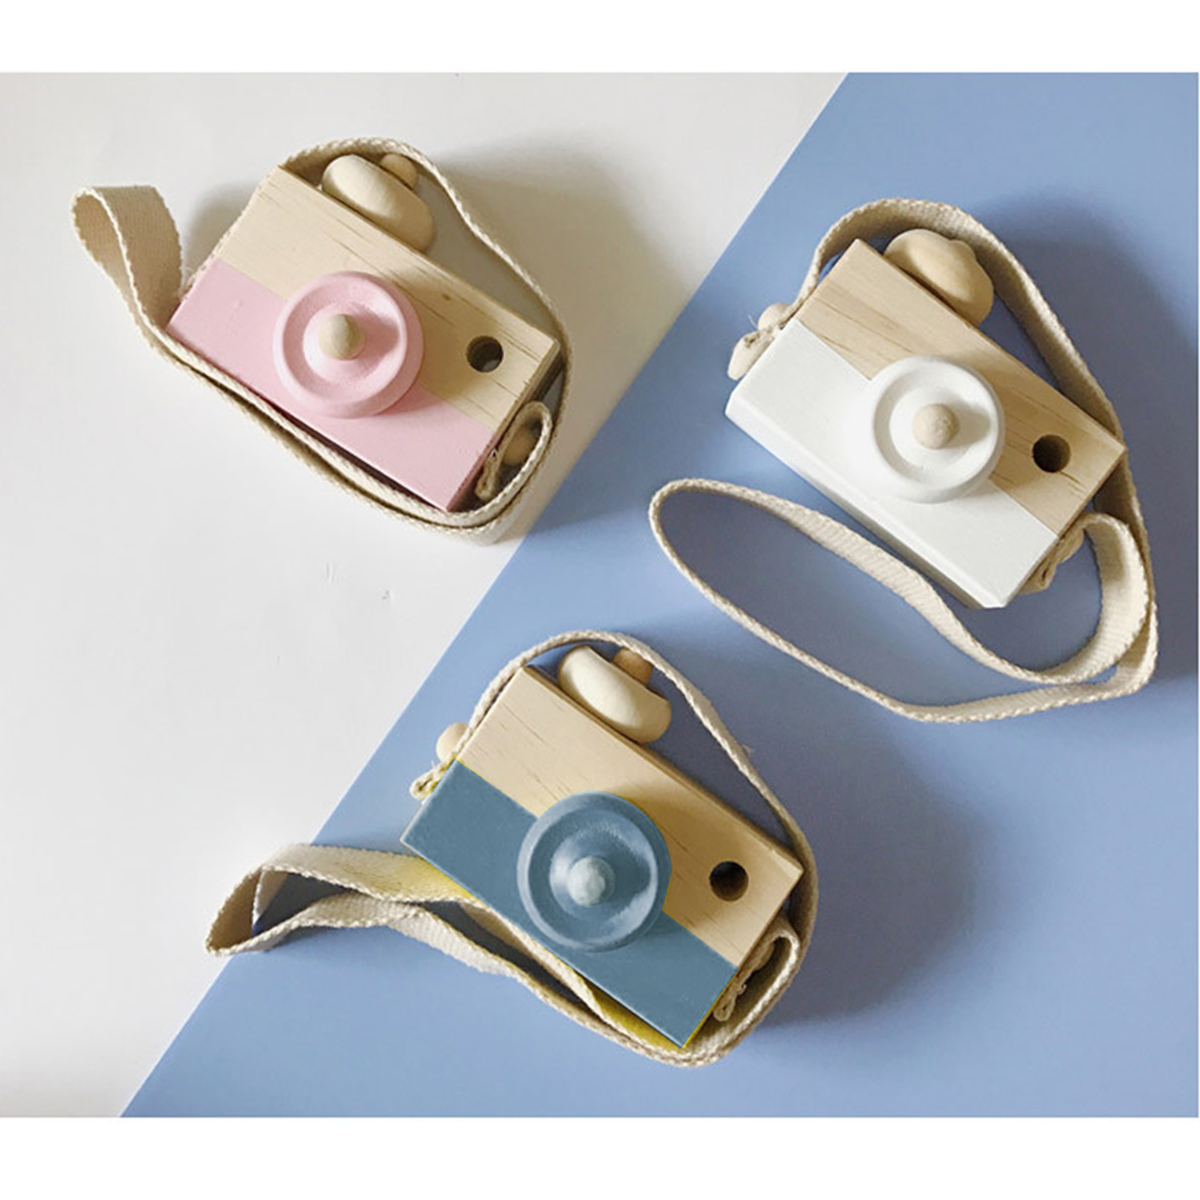 Wearable-Childrens-Wooden-Camera-Ornaments-Mini-Portable-Educational-Toys-Photography-Cute-Props-1573498-3